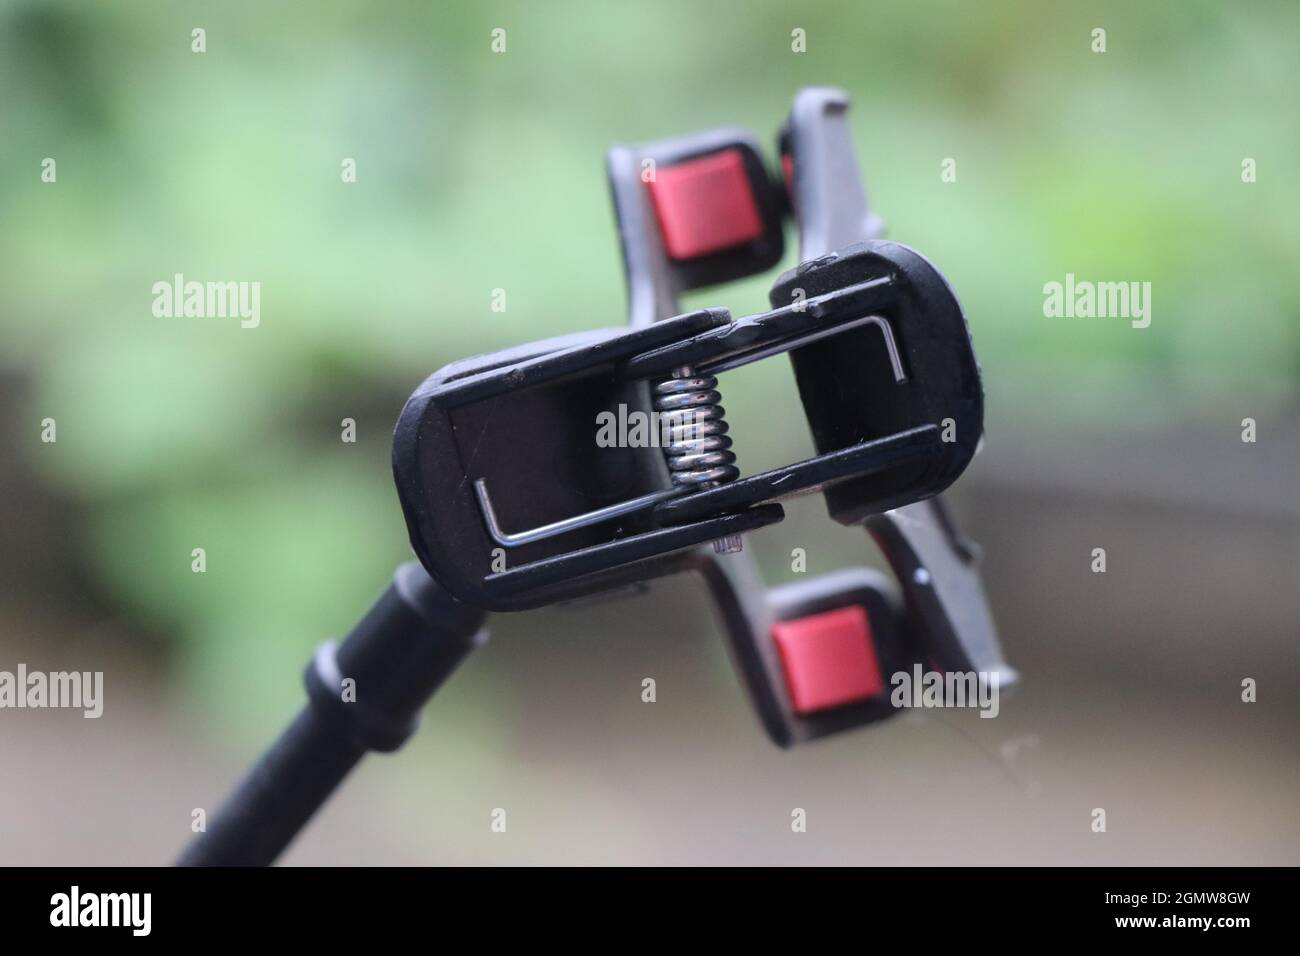 The clip part of mobile phone holder, cellphone holder for car and other automobiles close up view Stock Photo